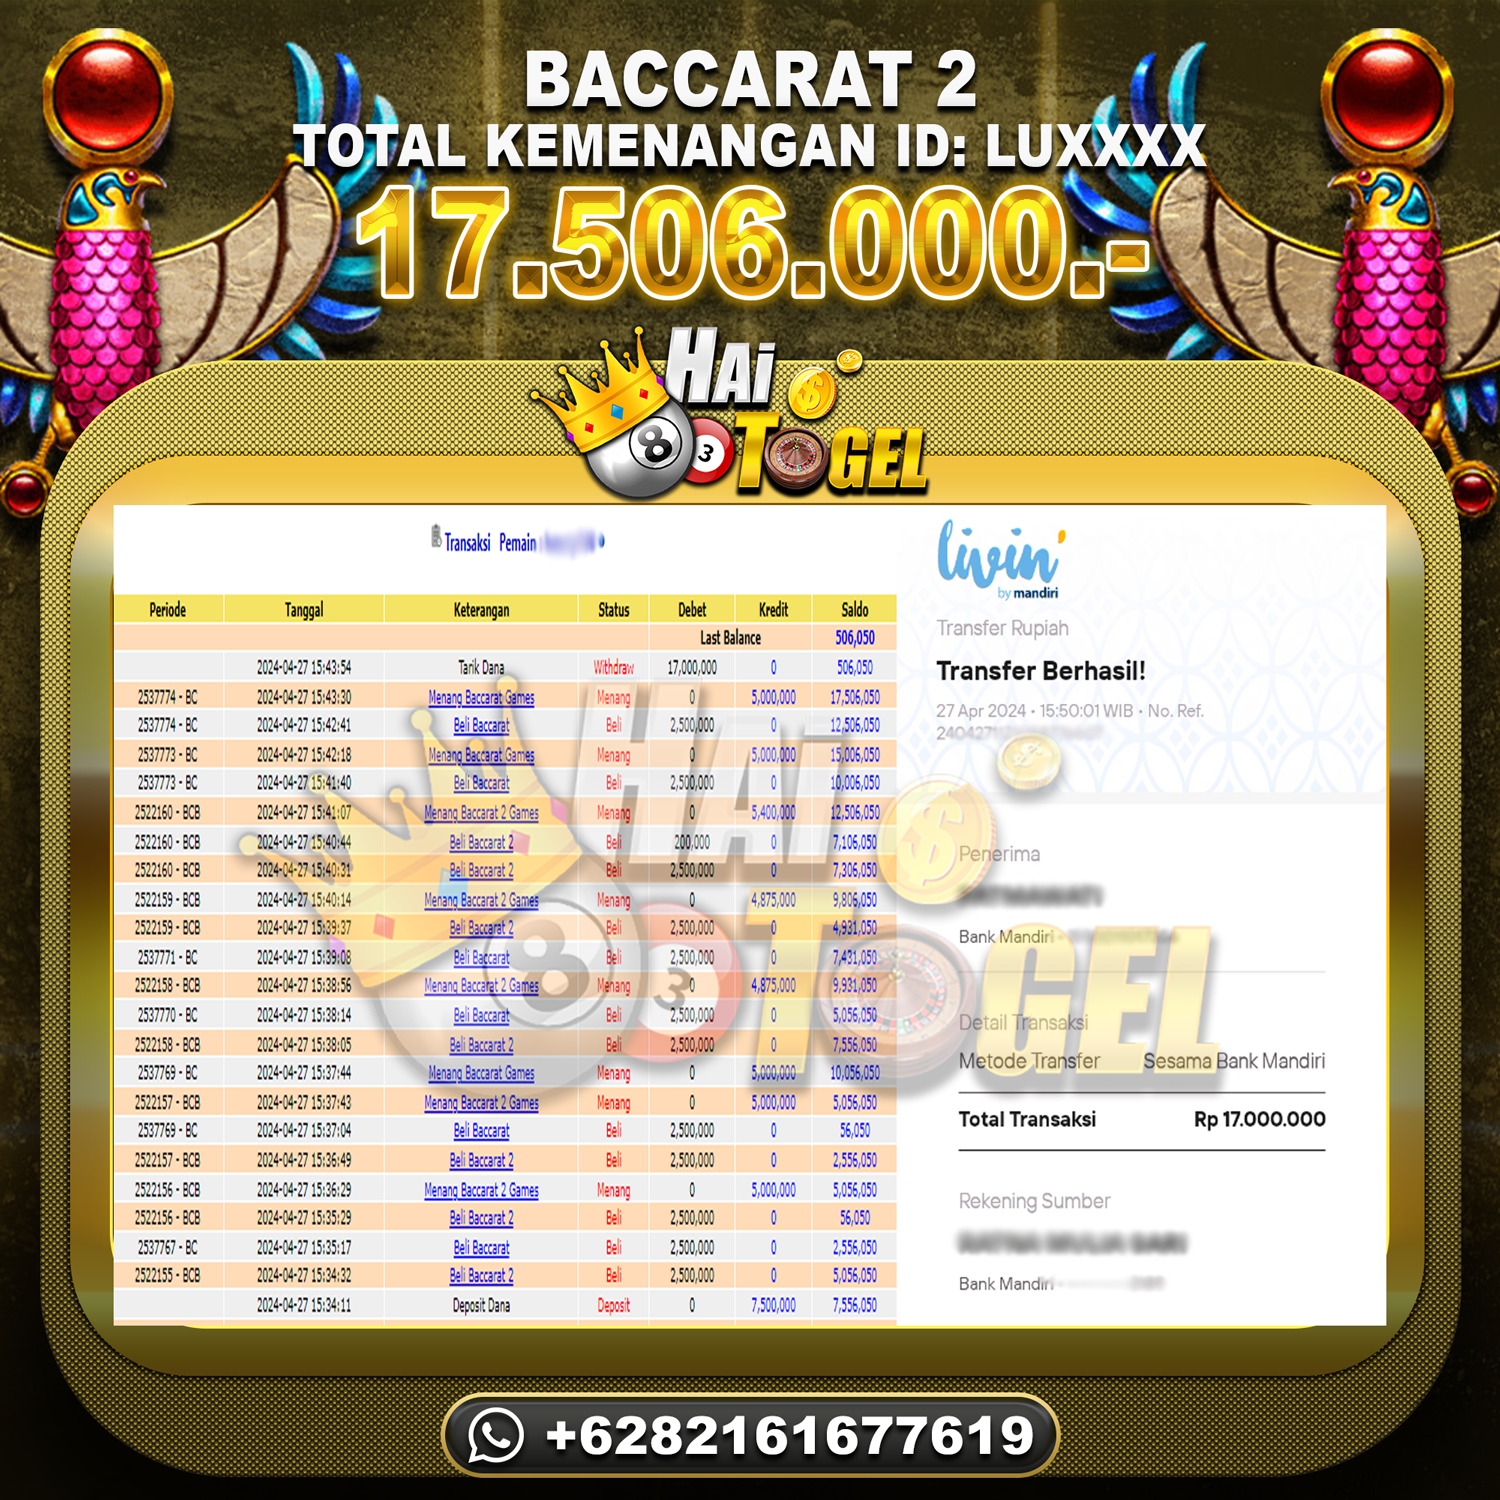 Read more about the article BUKTI CASINO HAITOGEL JACKPOT BACCARAT 2 RP. 17.506.000